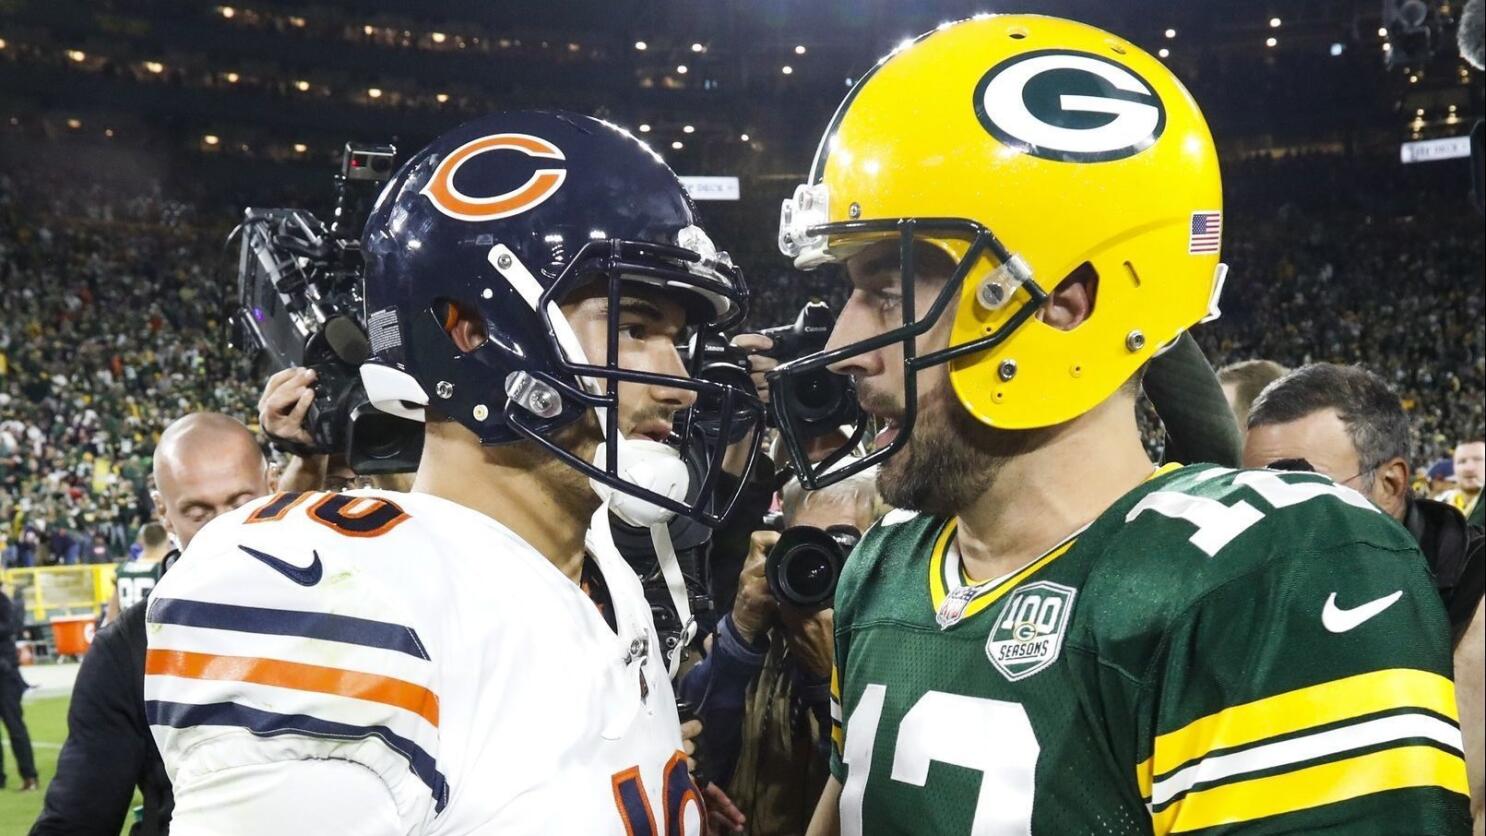 Chicago Bears to host Green Bay Packers in first game of 2019 NFL season, NFL News